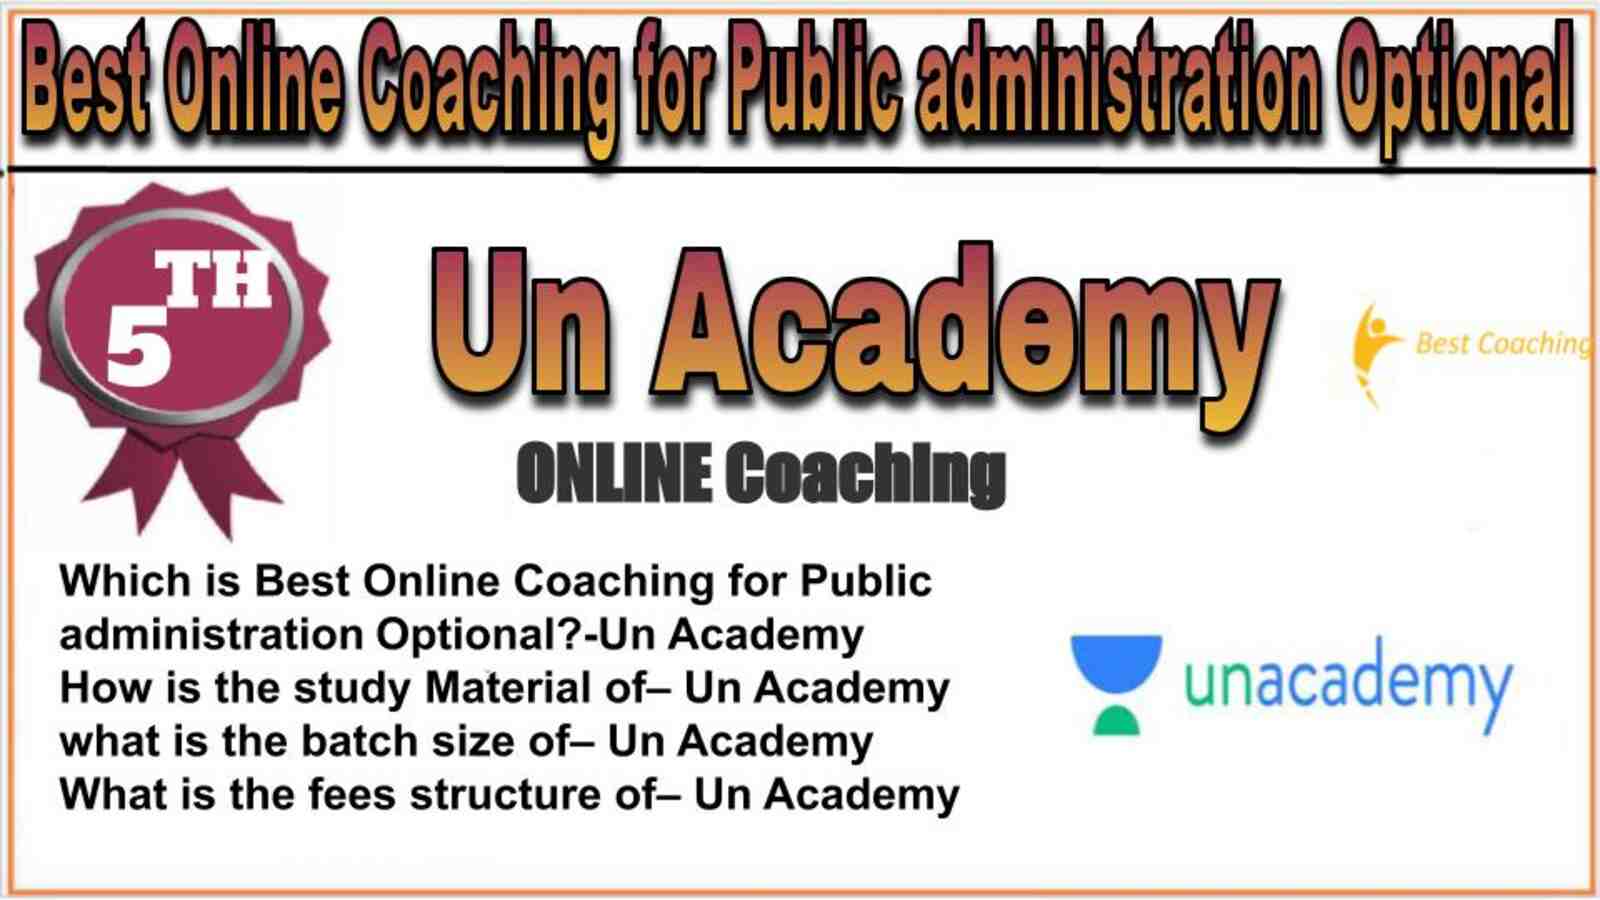 Rank 5 best online coaching for Public administration Optional